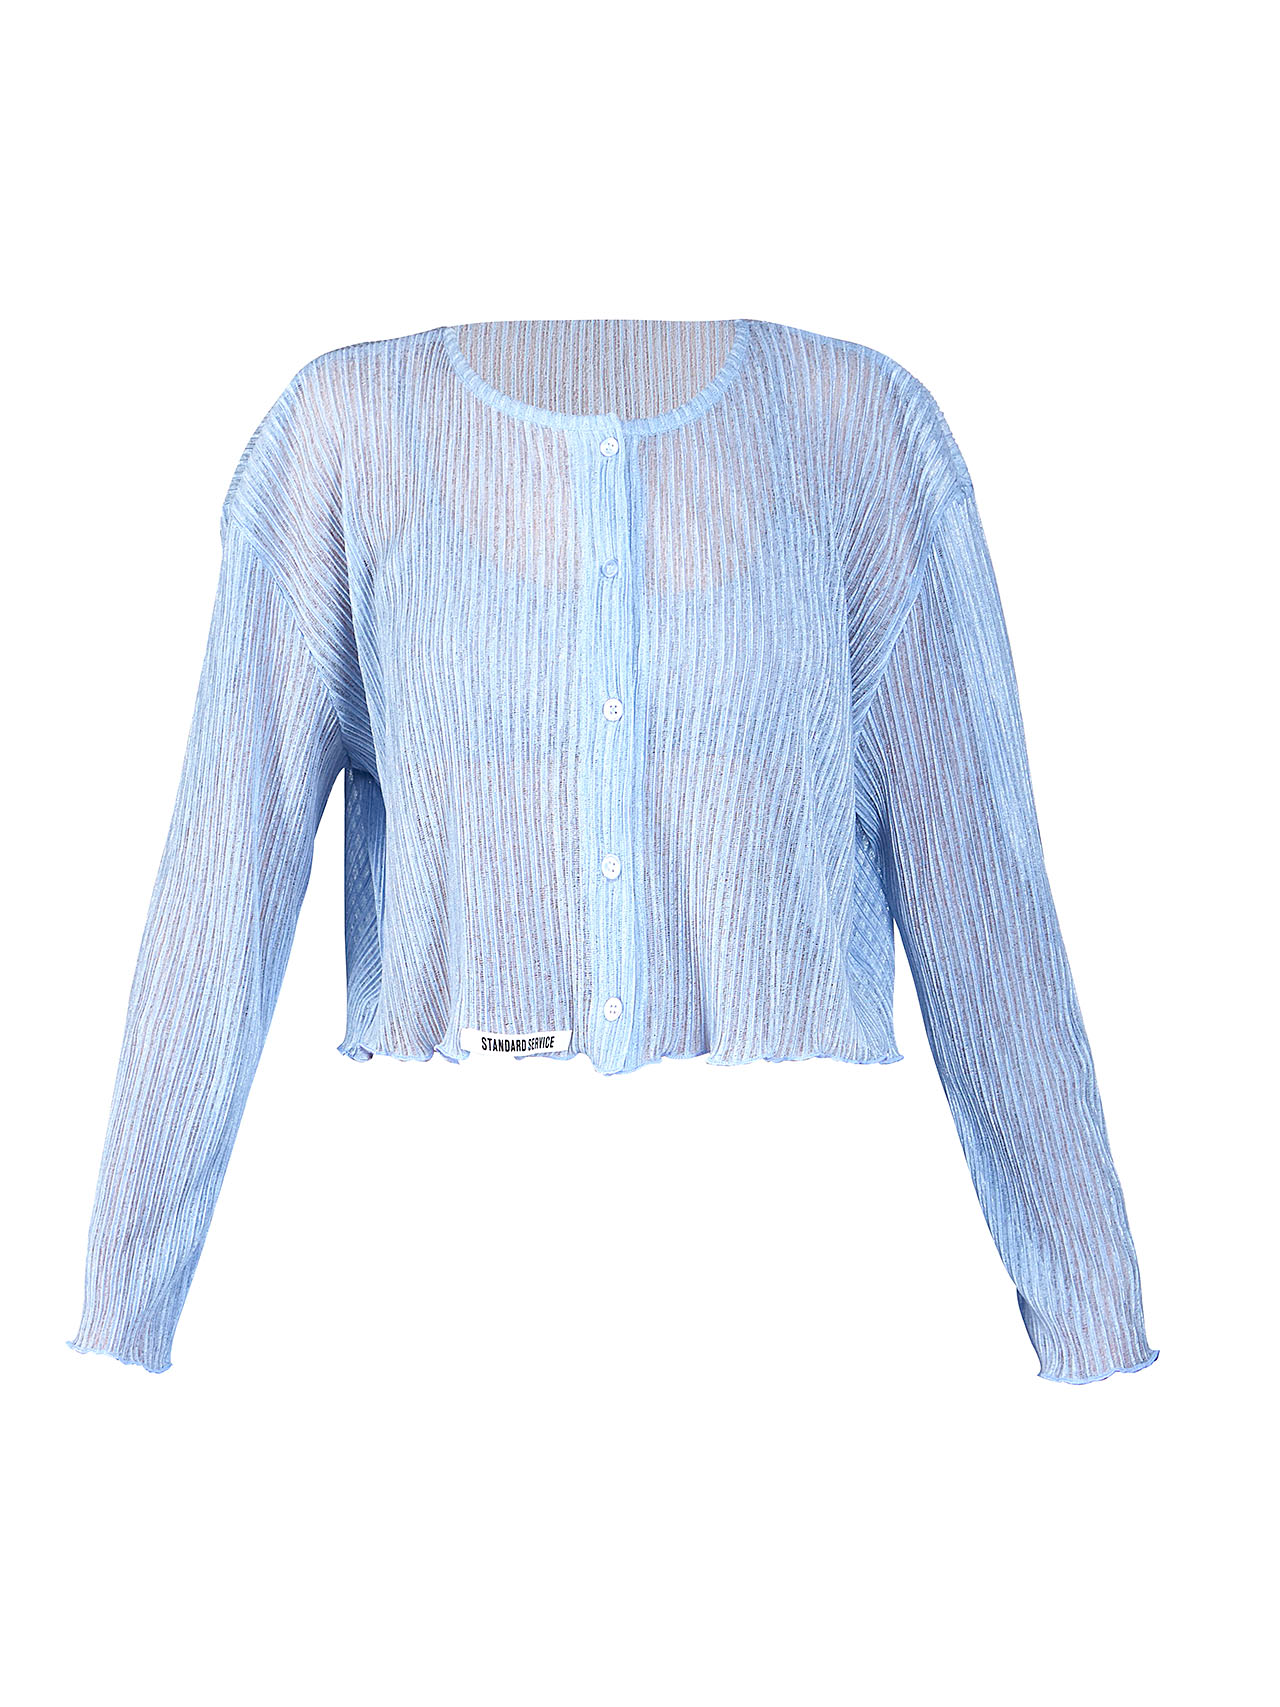 Relaxation Blouse Blue